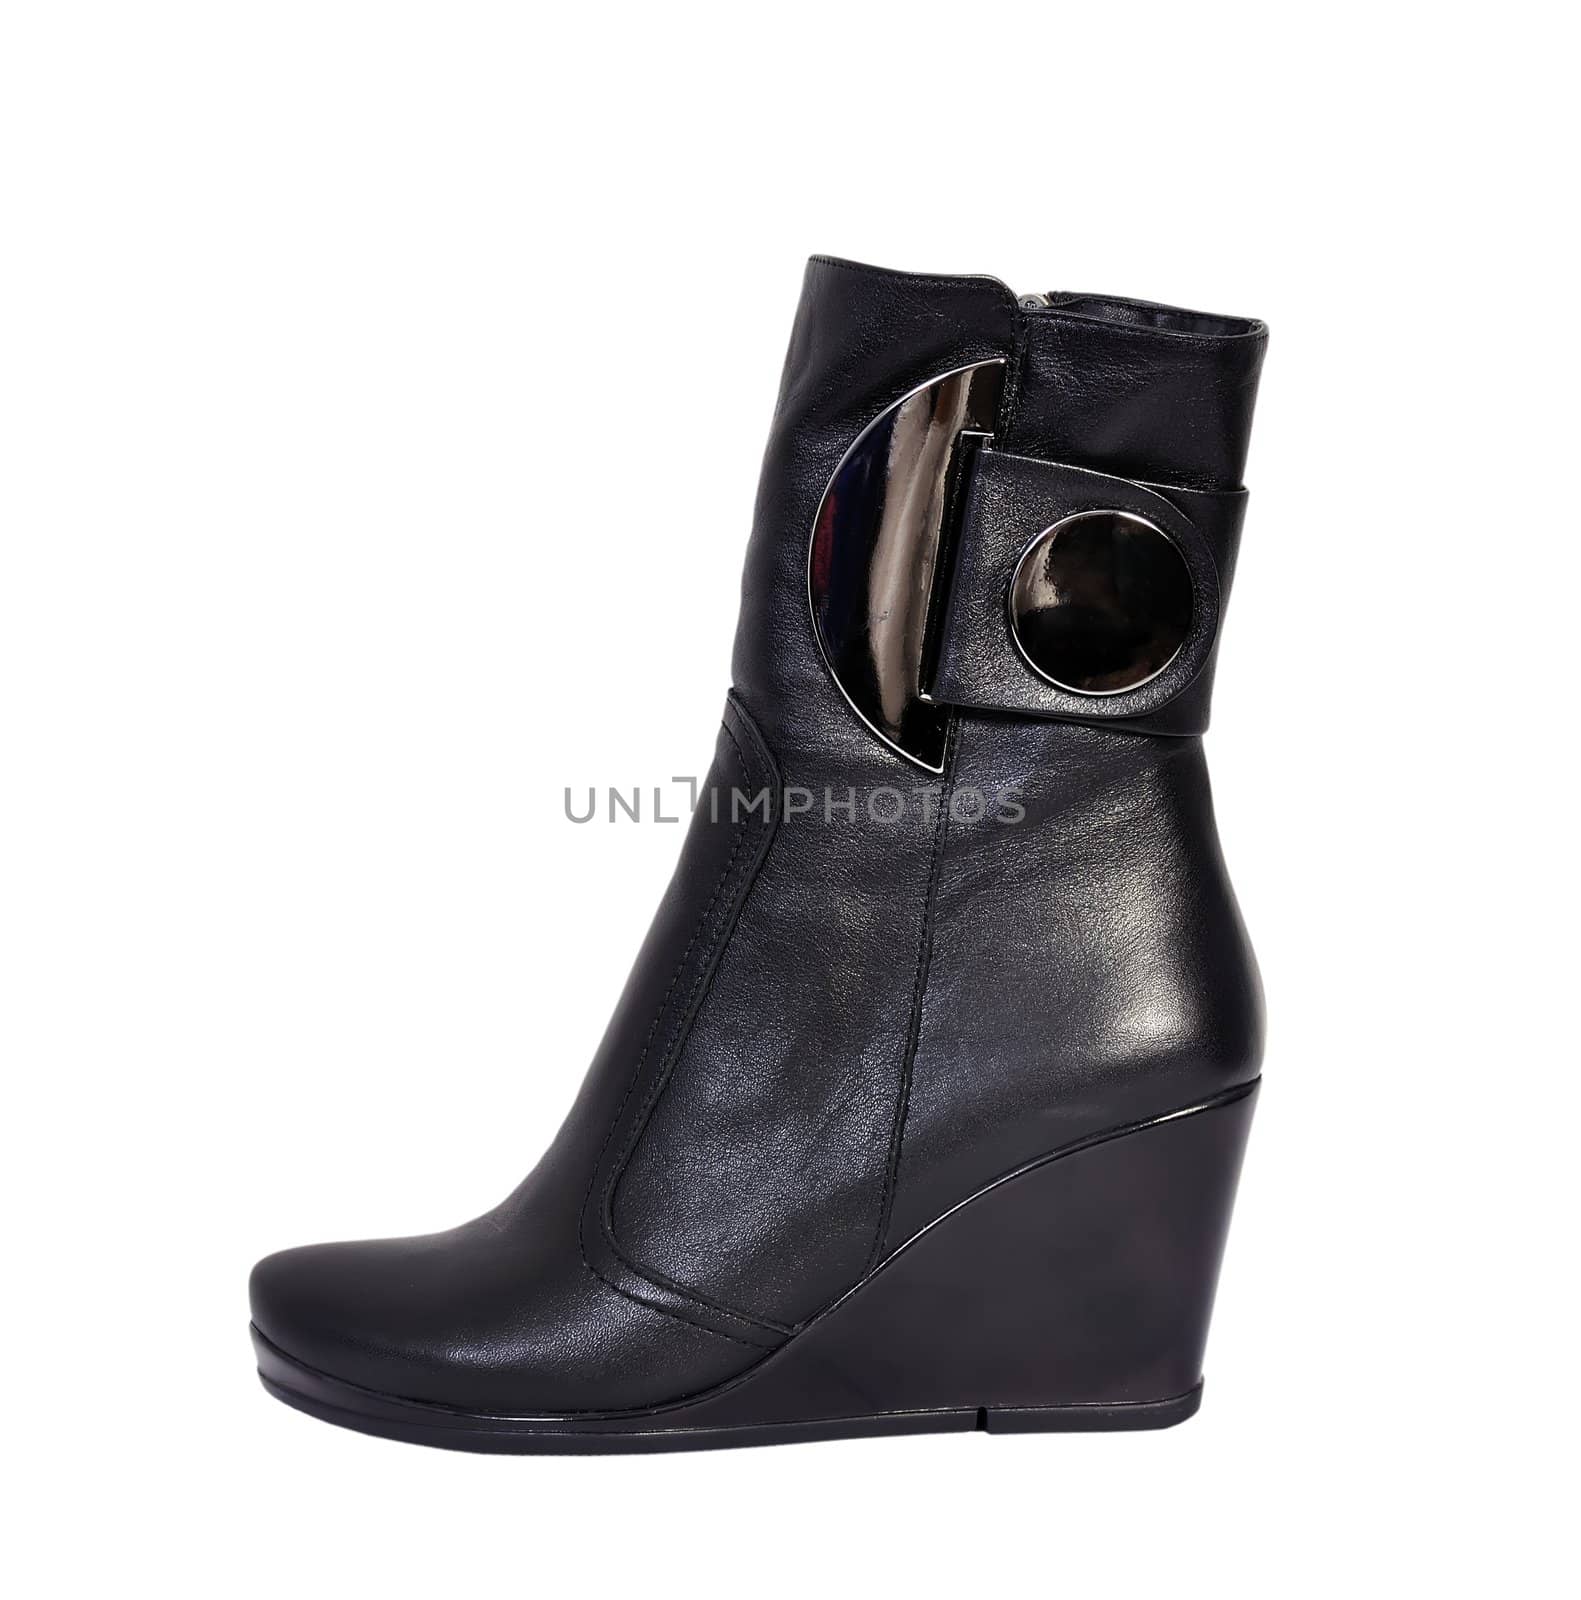 black women's boots on a white background